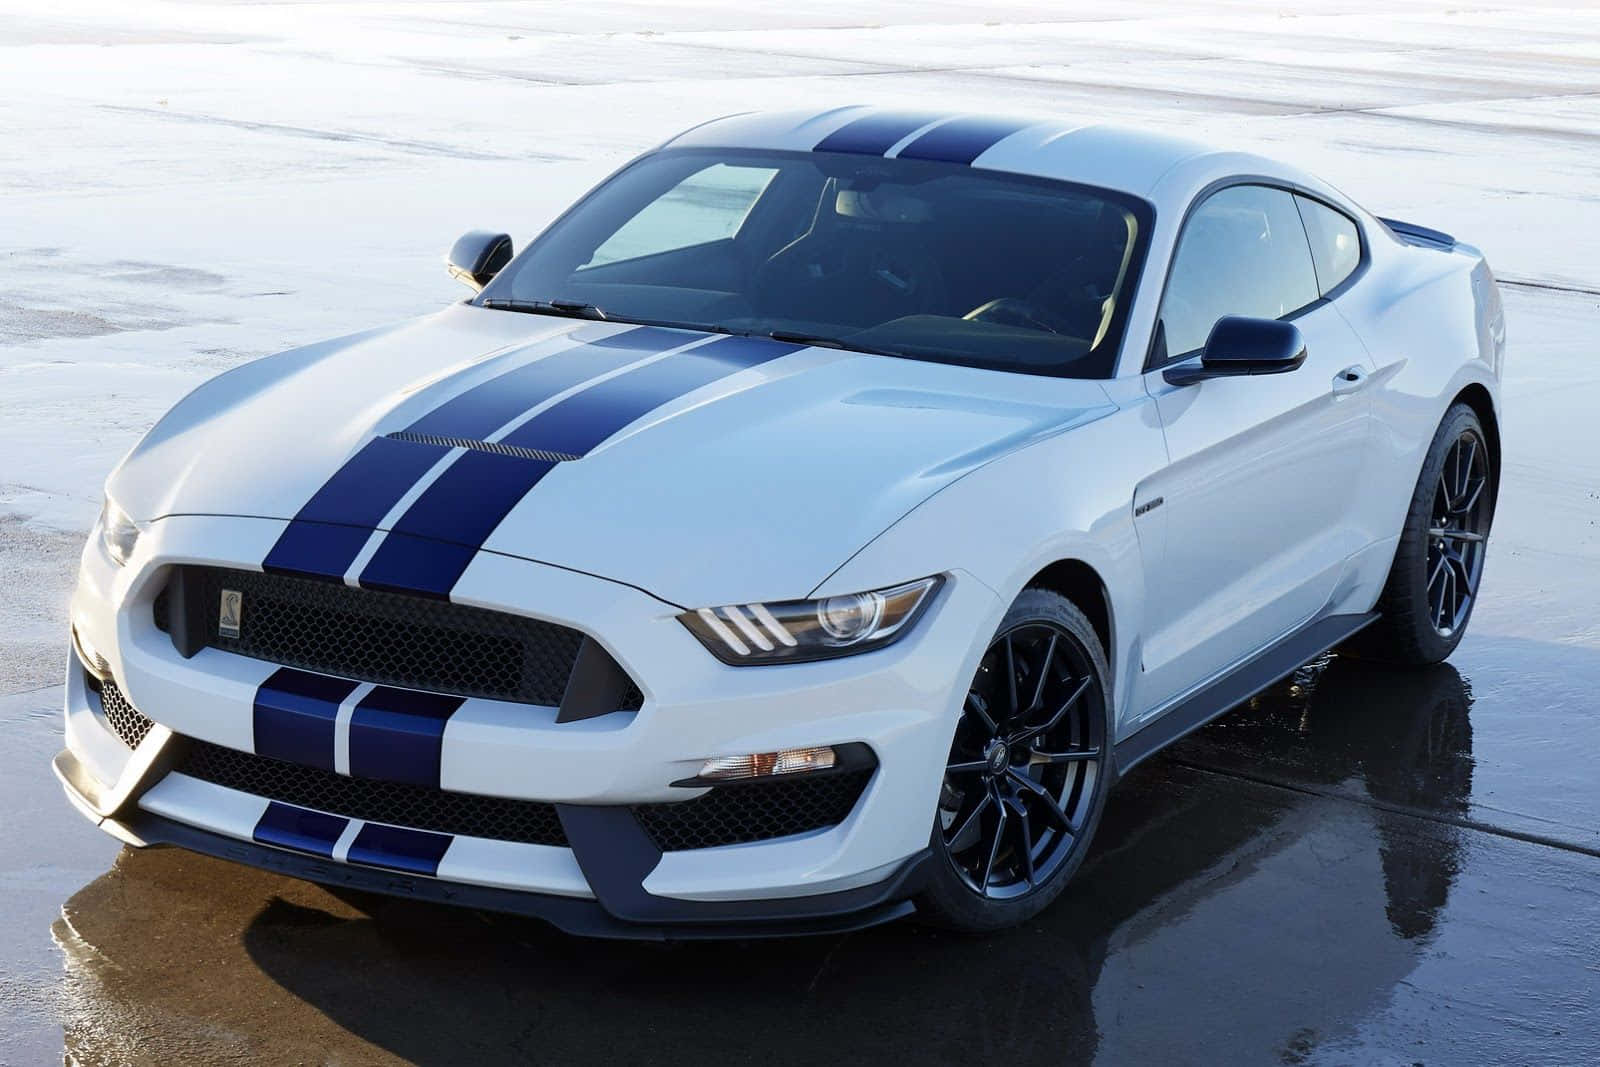 Ford Mustang Shelby GT350 in Action Wallpaper